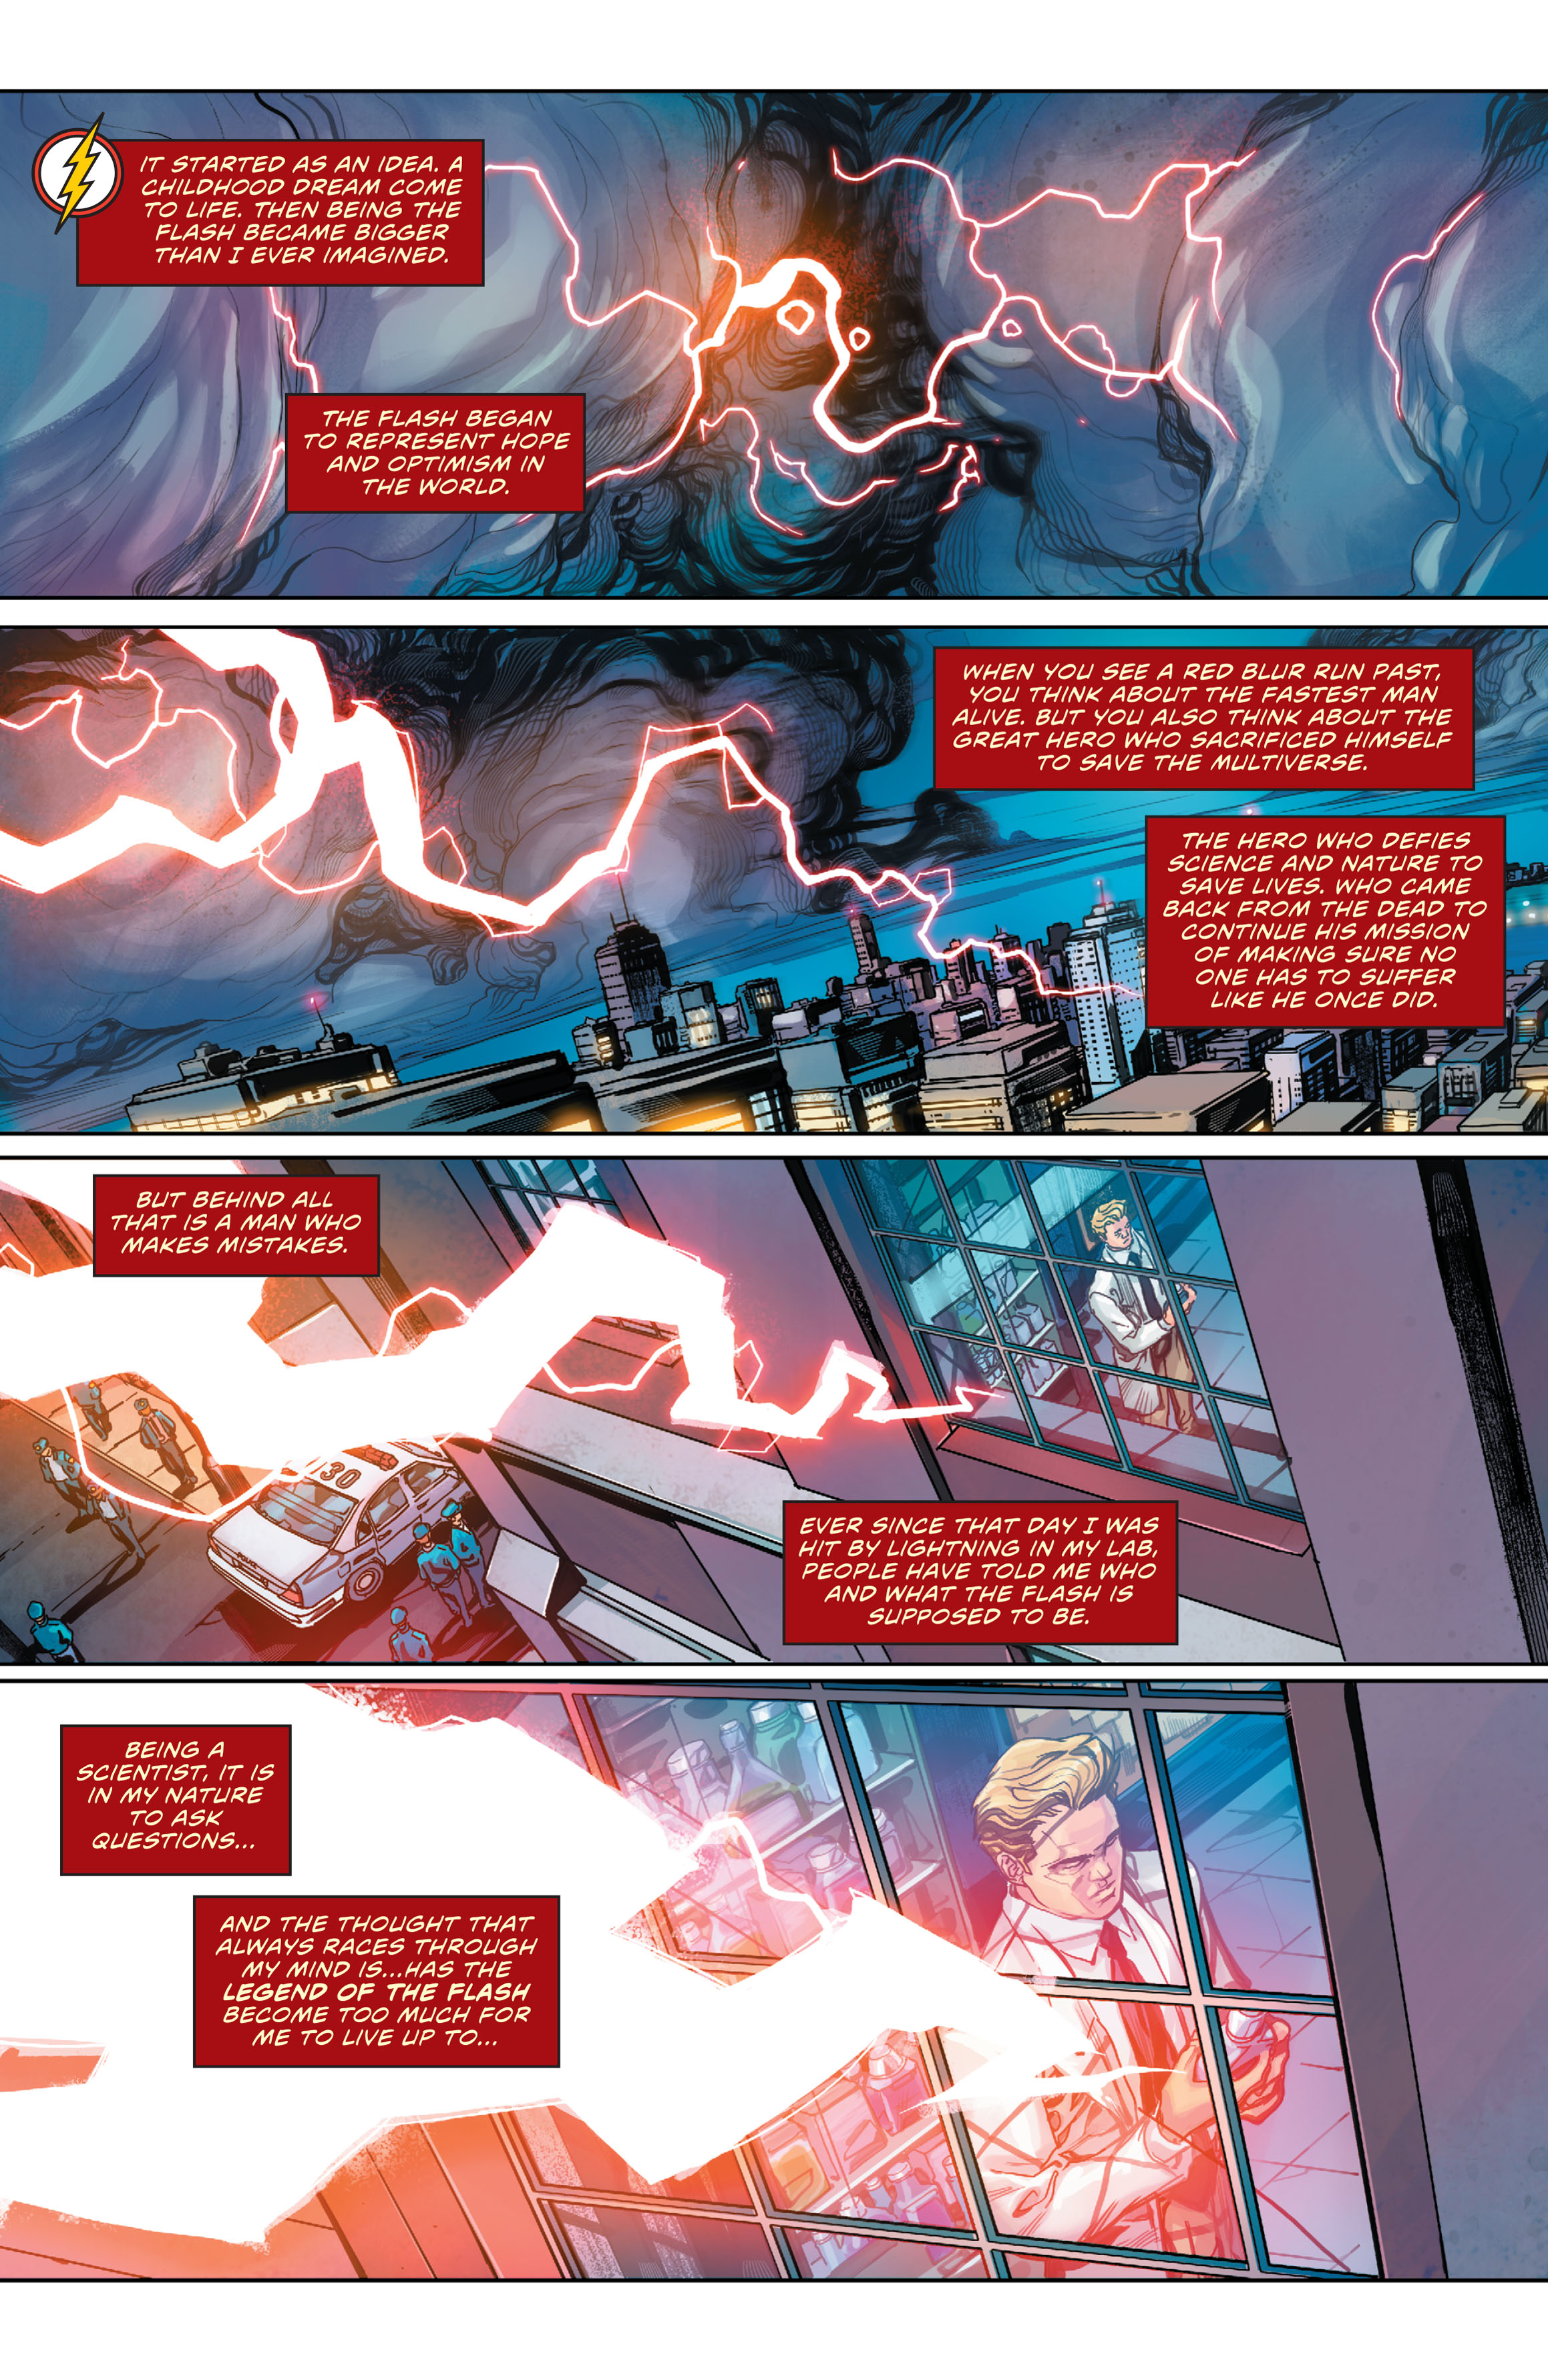 The Flash (2016-): Chapter 762 - Page 3